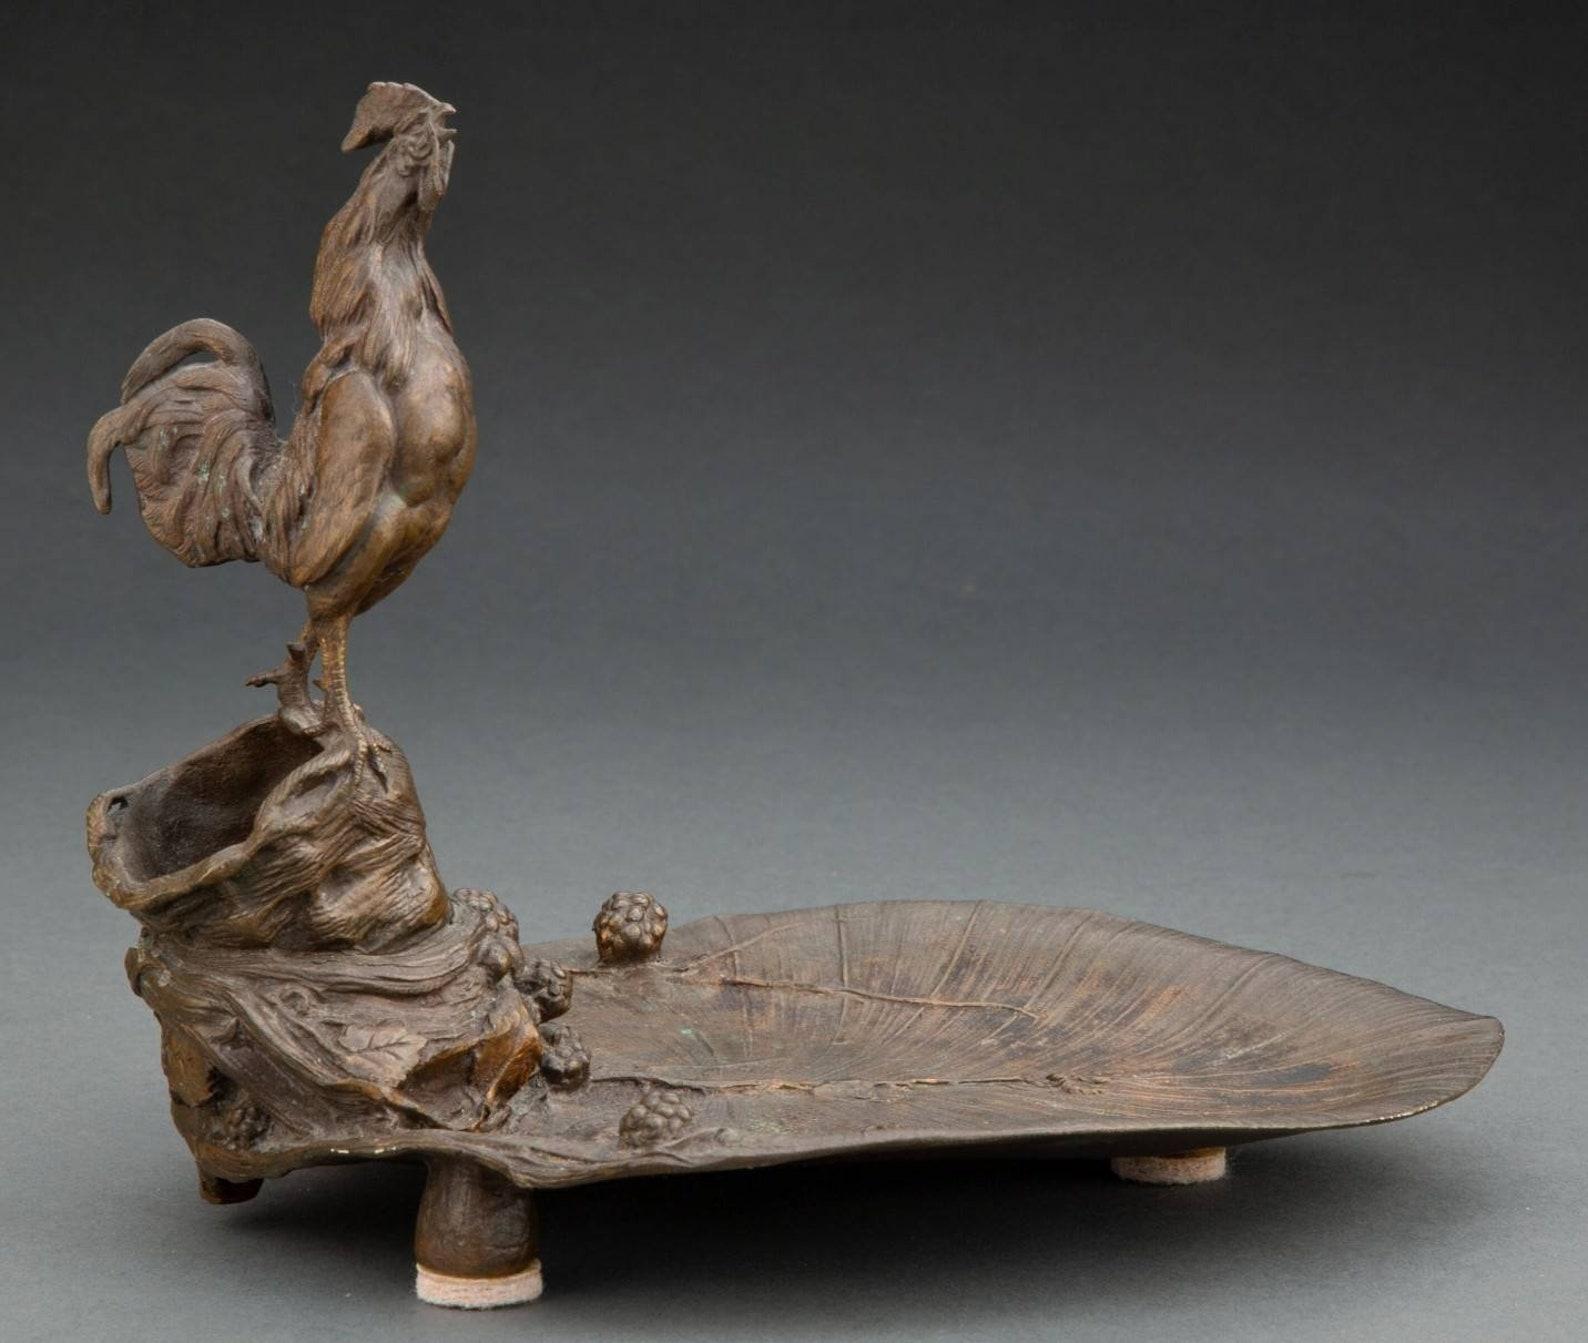 A very fine Auguste Nicolas Cain (French, 1822-1894) bronze sculpture depicting a crowing rooster perched atop naturalistic base of stylized log over large leaf form dish, decorated with blackberries.

Bronze with golden brown patina
circa 1880;